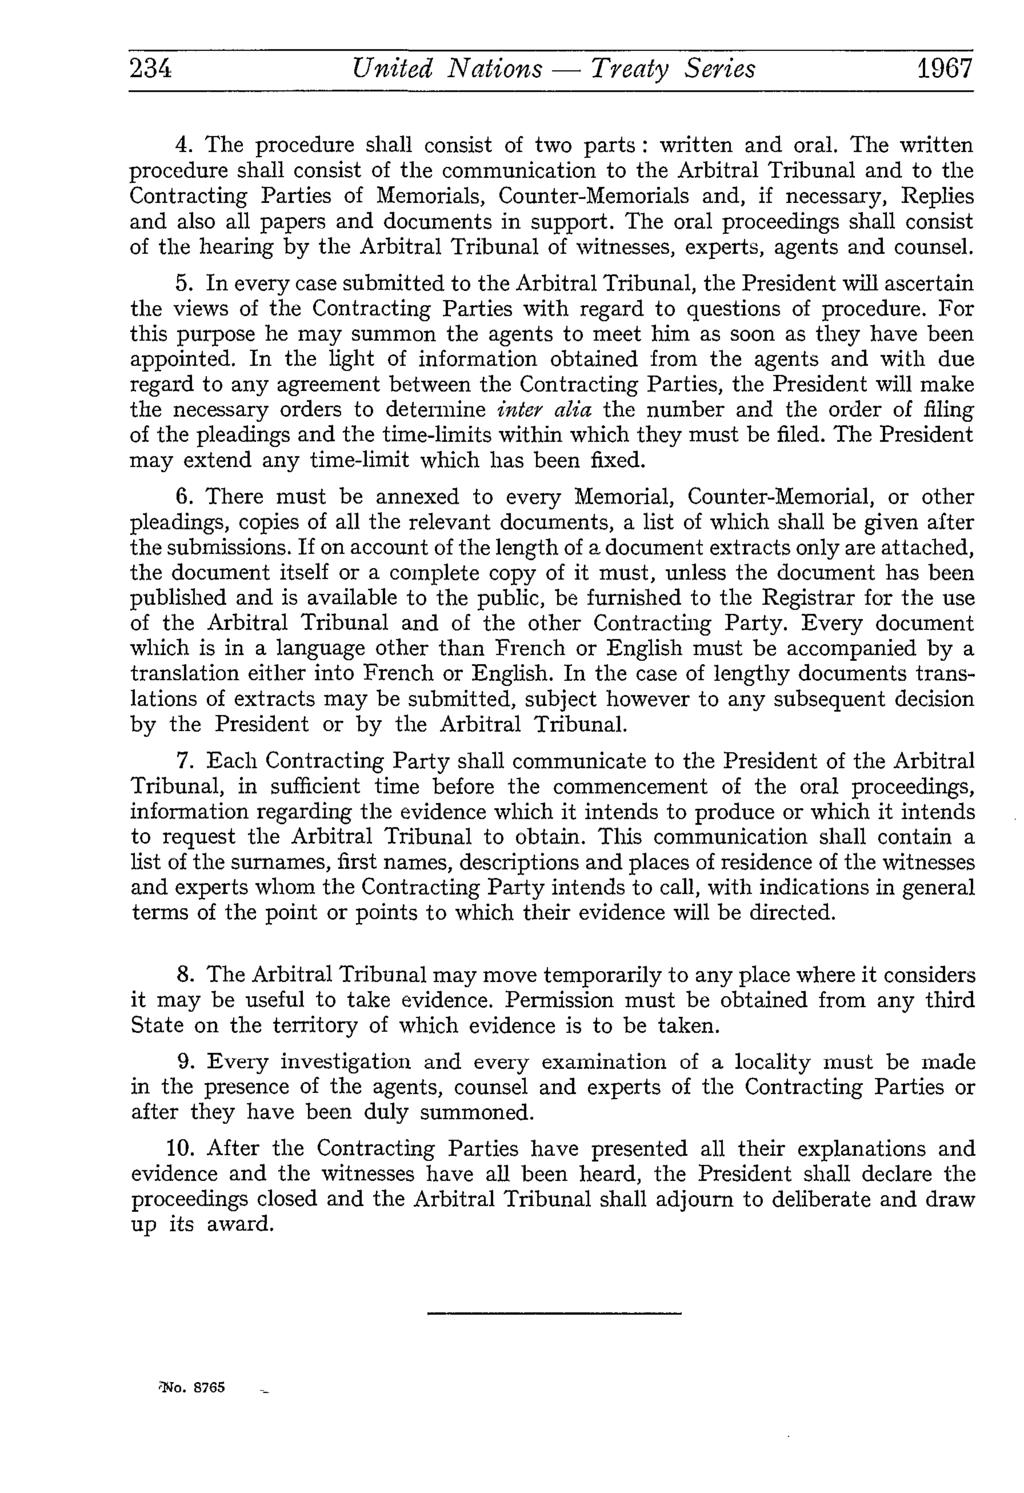 234 United Nations Treaty Series 1967 4. The procedure shall consist of two parts : written and oral.